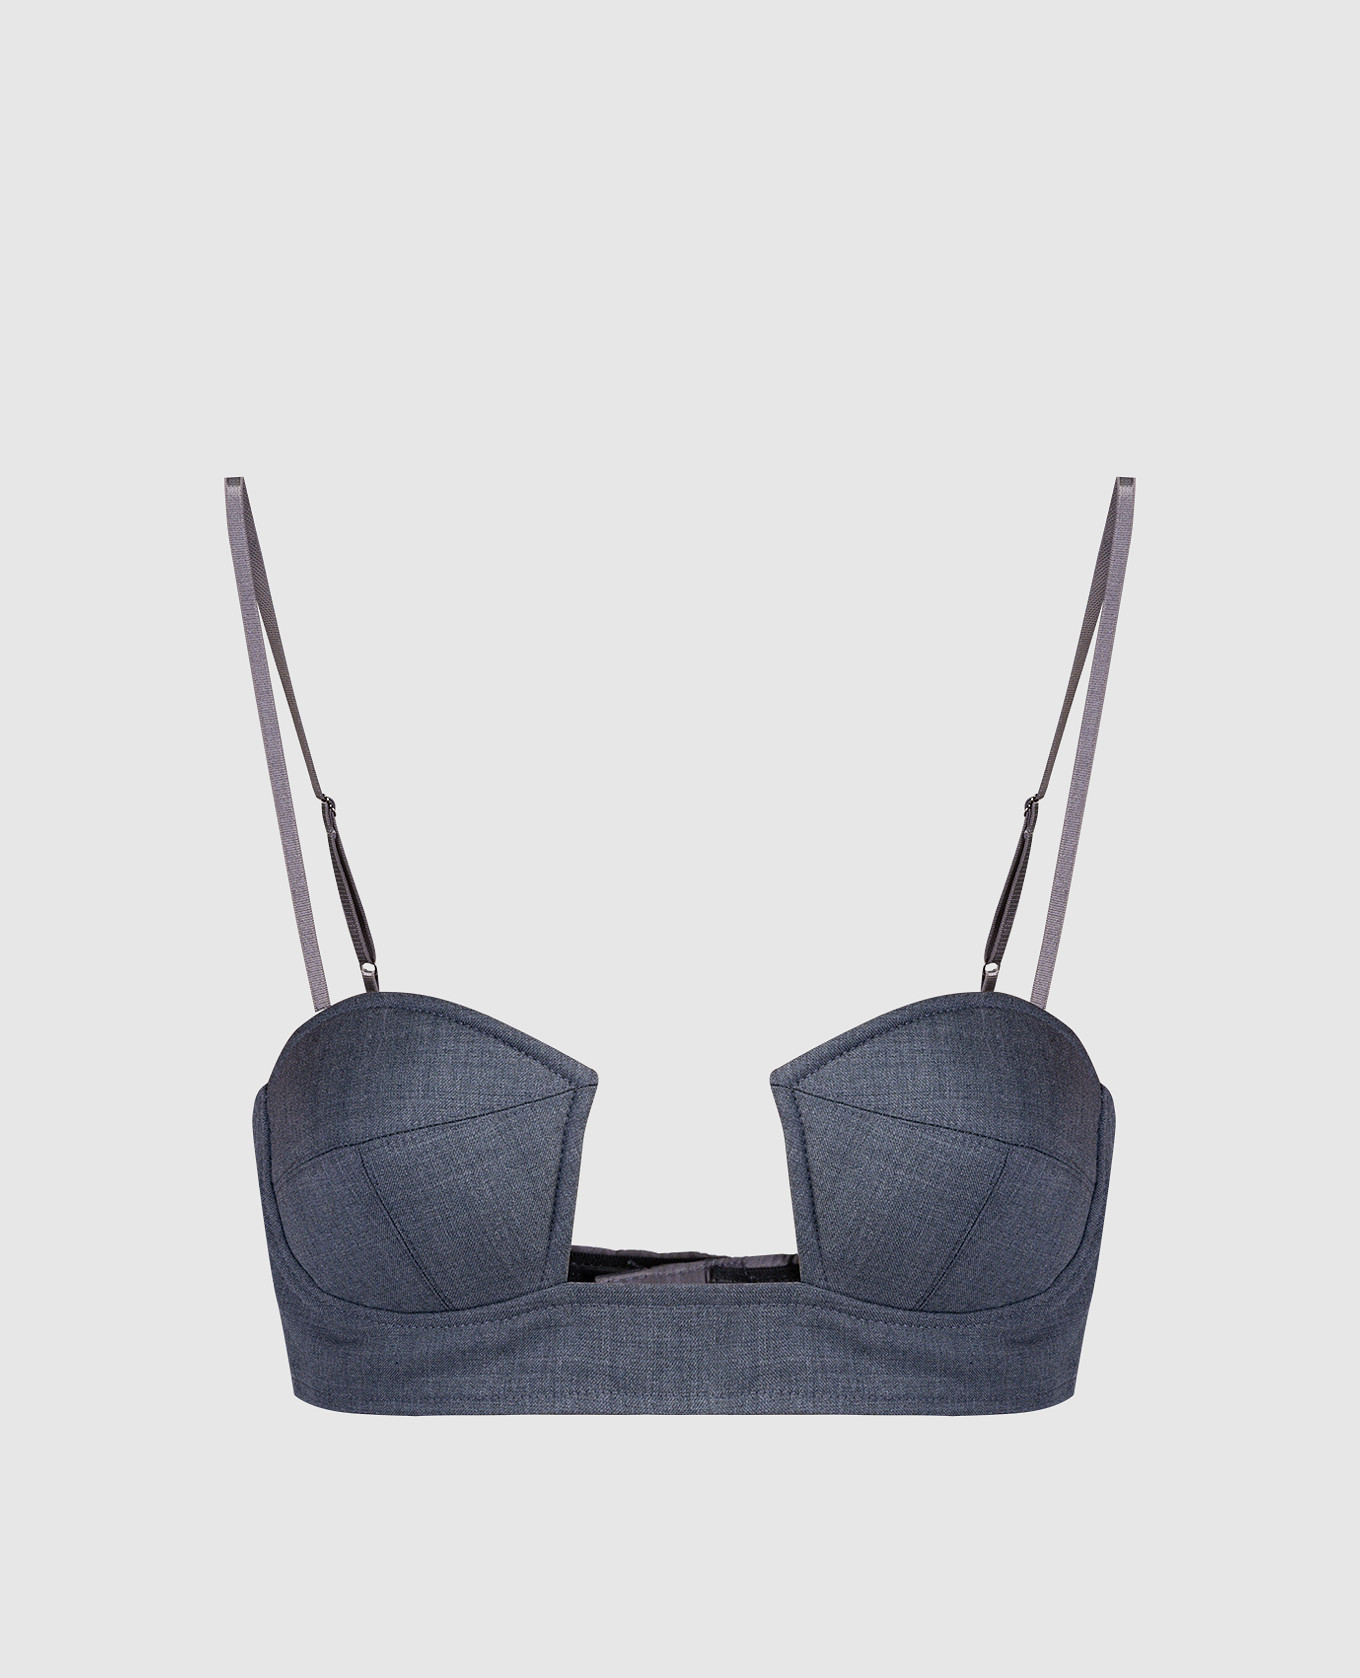 Gray bralette top with a figure-hugging neckline